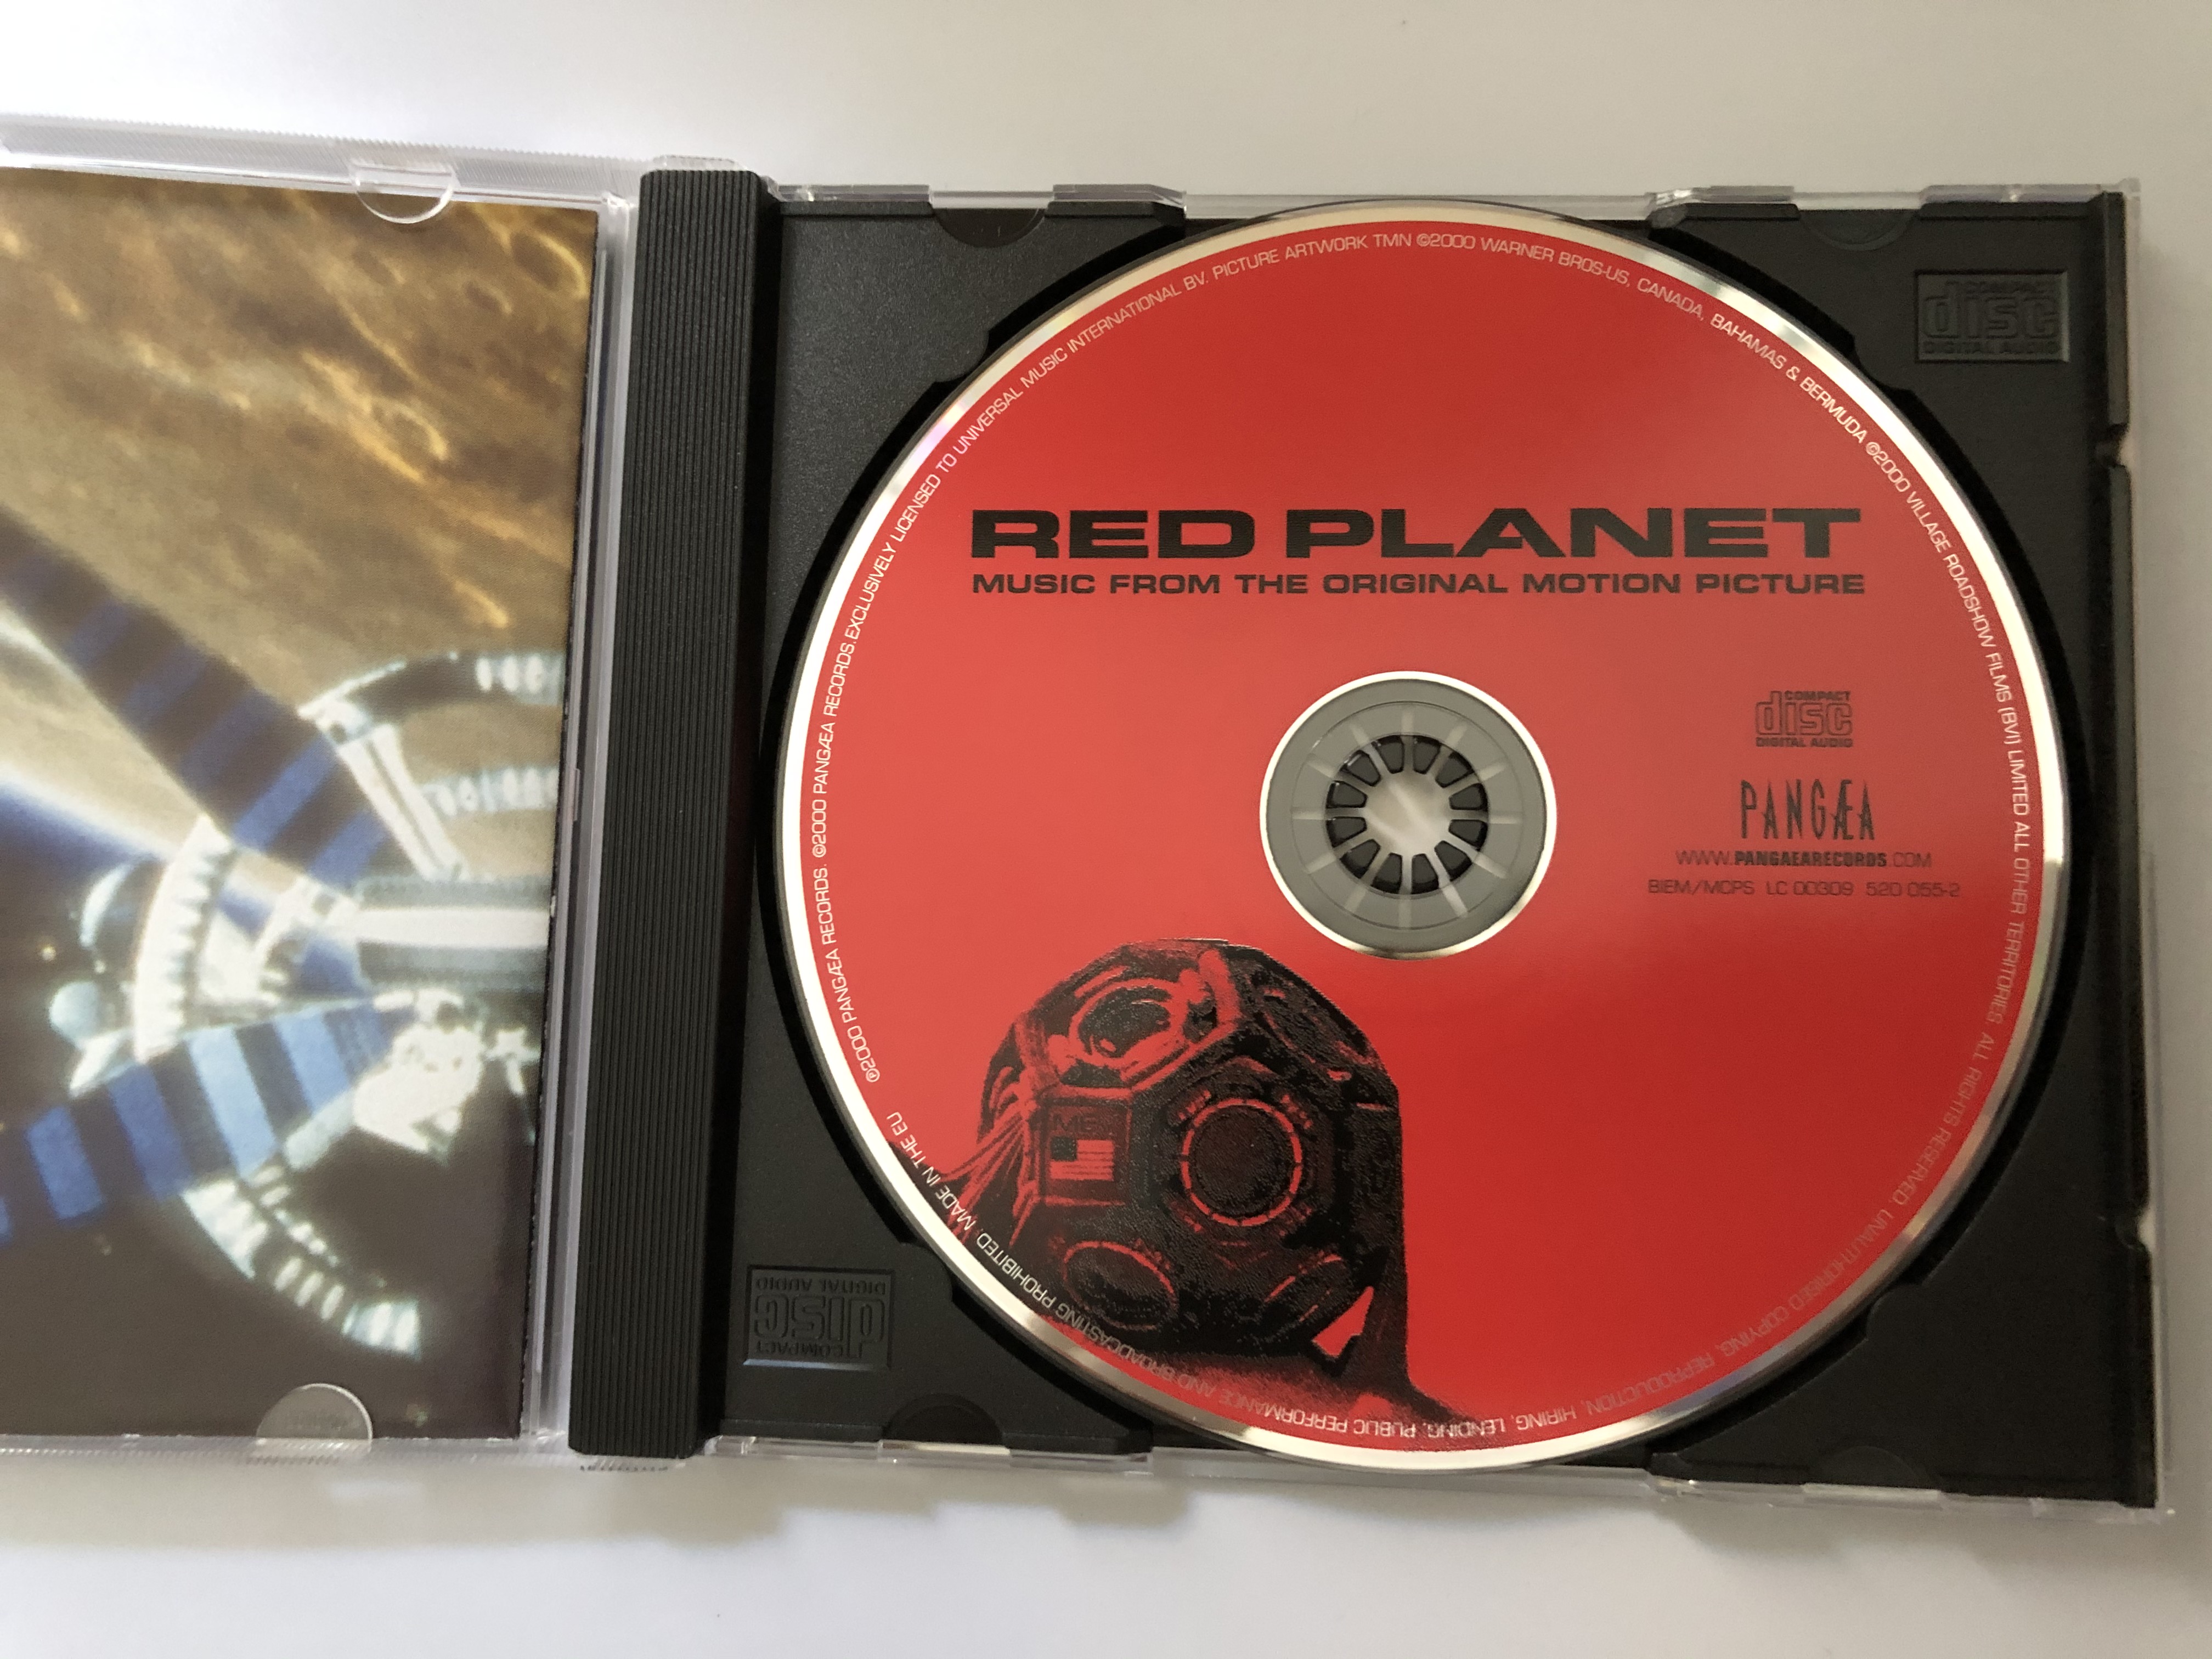 red-planet-music-from-the-original-motion-picture-music-by-graeme-revell-not-a-sound-not-a-warning-not-a-chance-not-alone.-pang-a-audio-cd-2000-520-055-2-4-.jpg